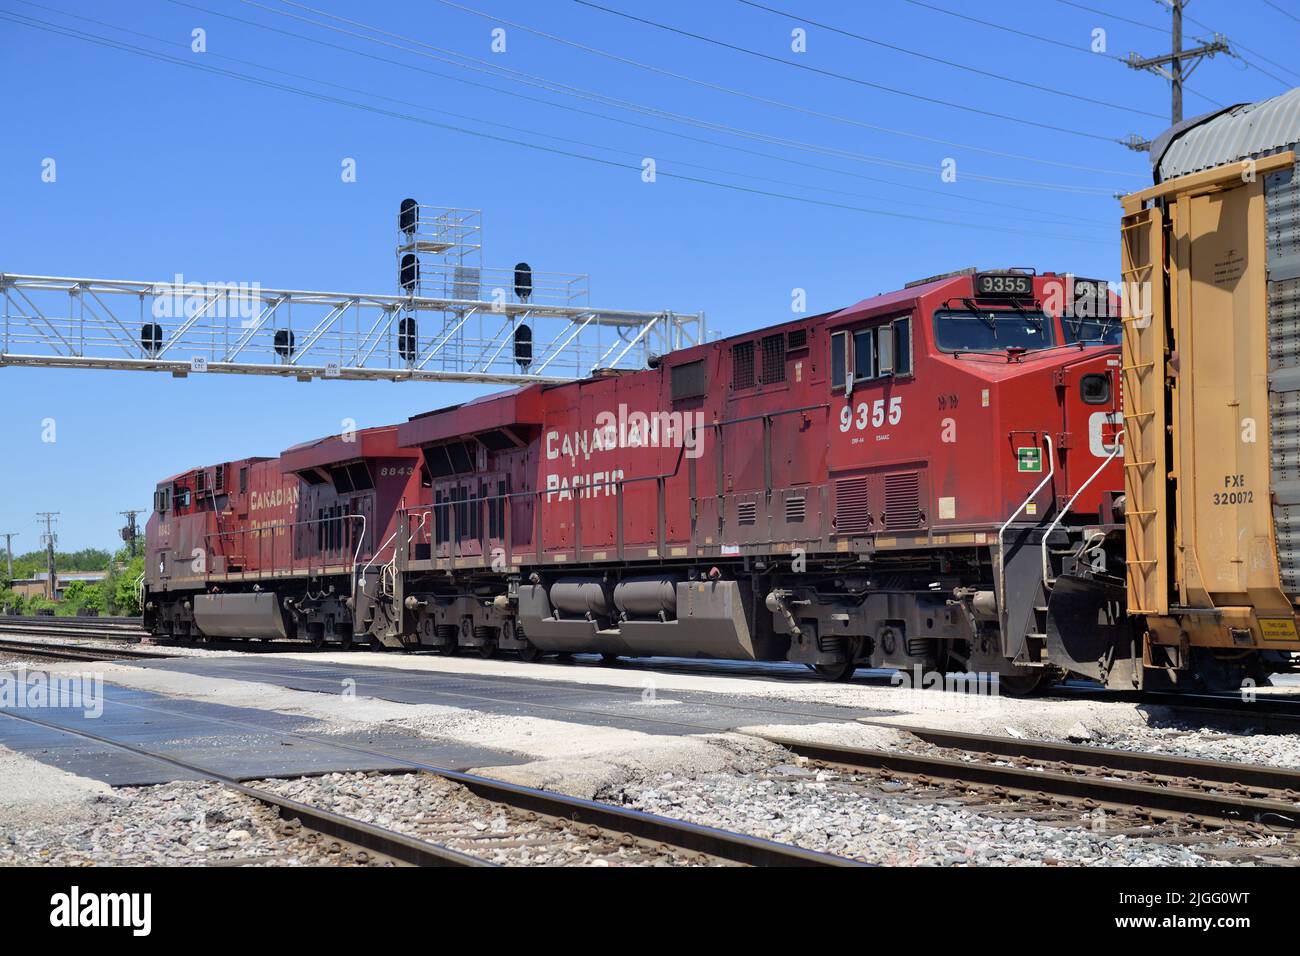 Franklin Park, Illinois, USA. Canadian Pacific Railway locomotives lead a freight train through a street crossing and under a signal bridge. Stock Photo